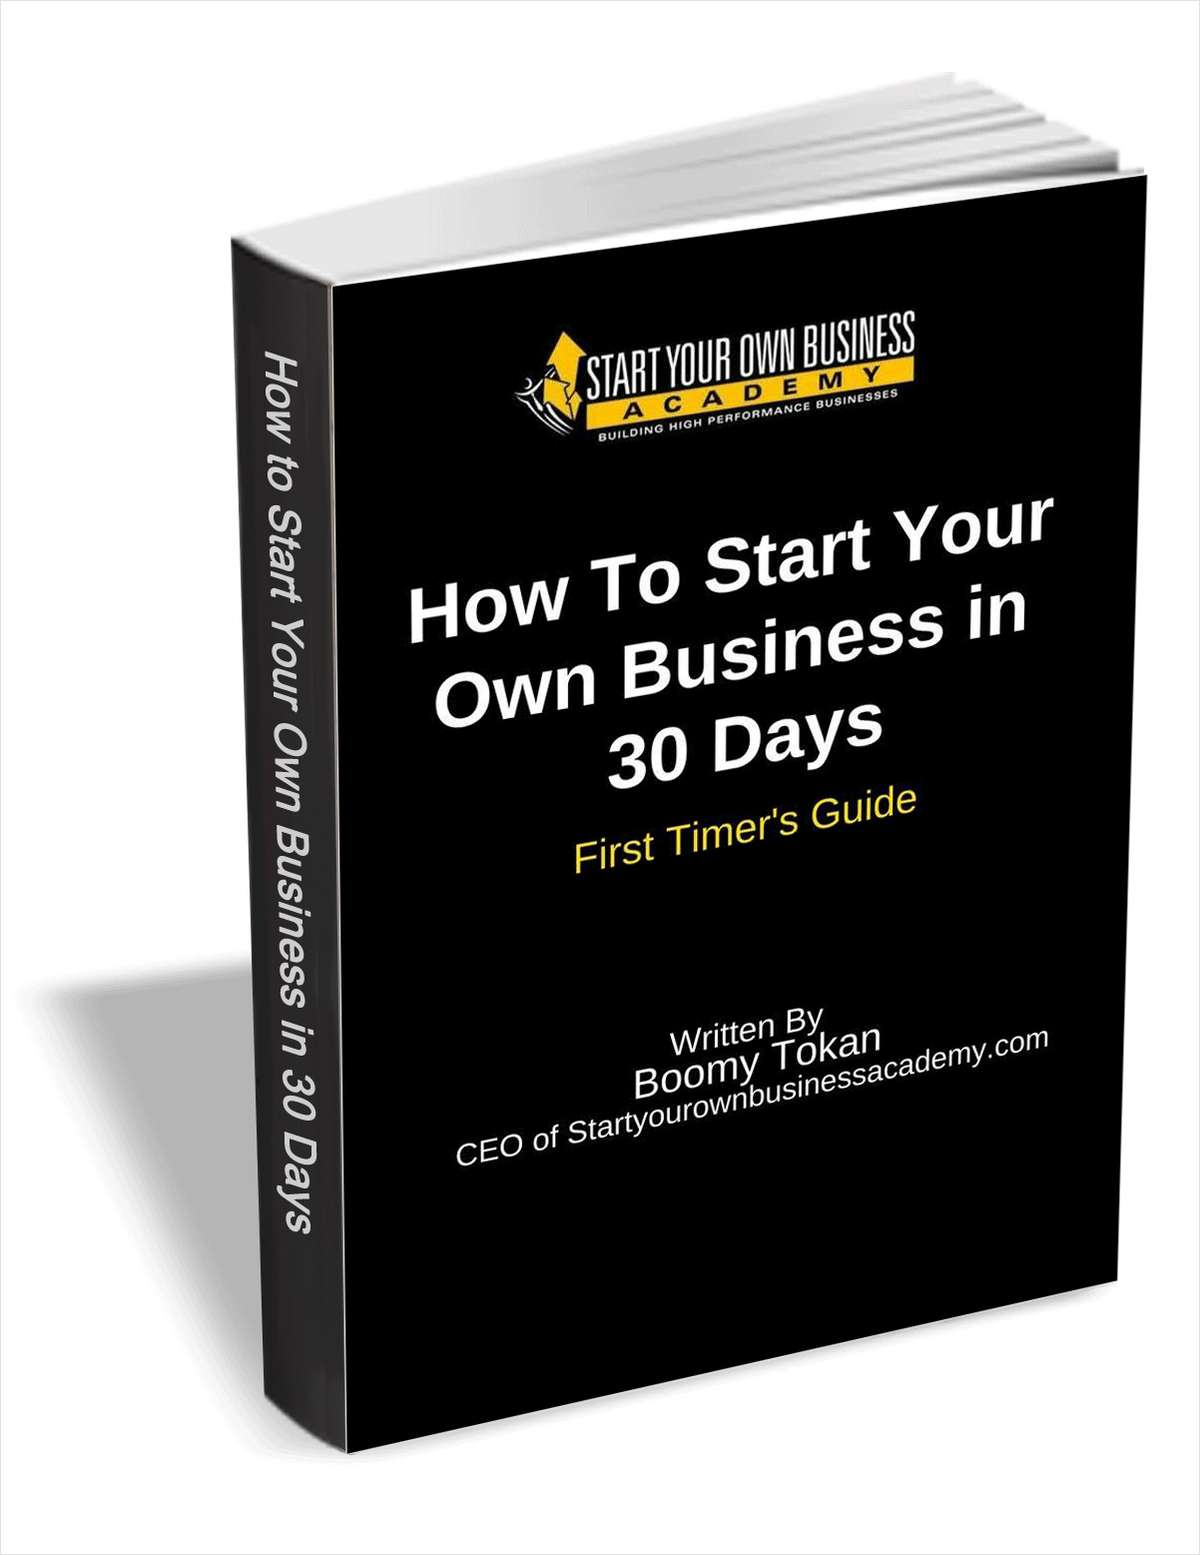 How To Start Your Own Business in 30 Days - First Timer's Guide